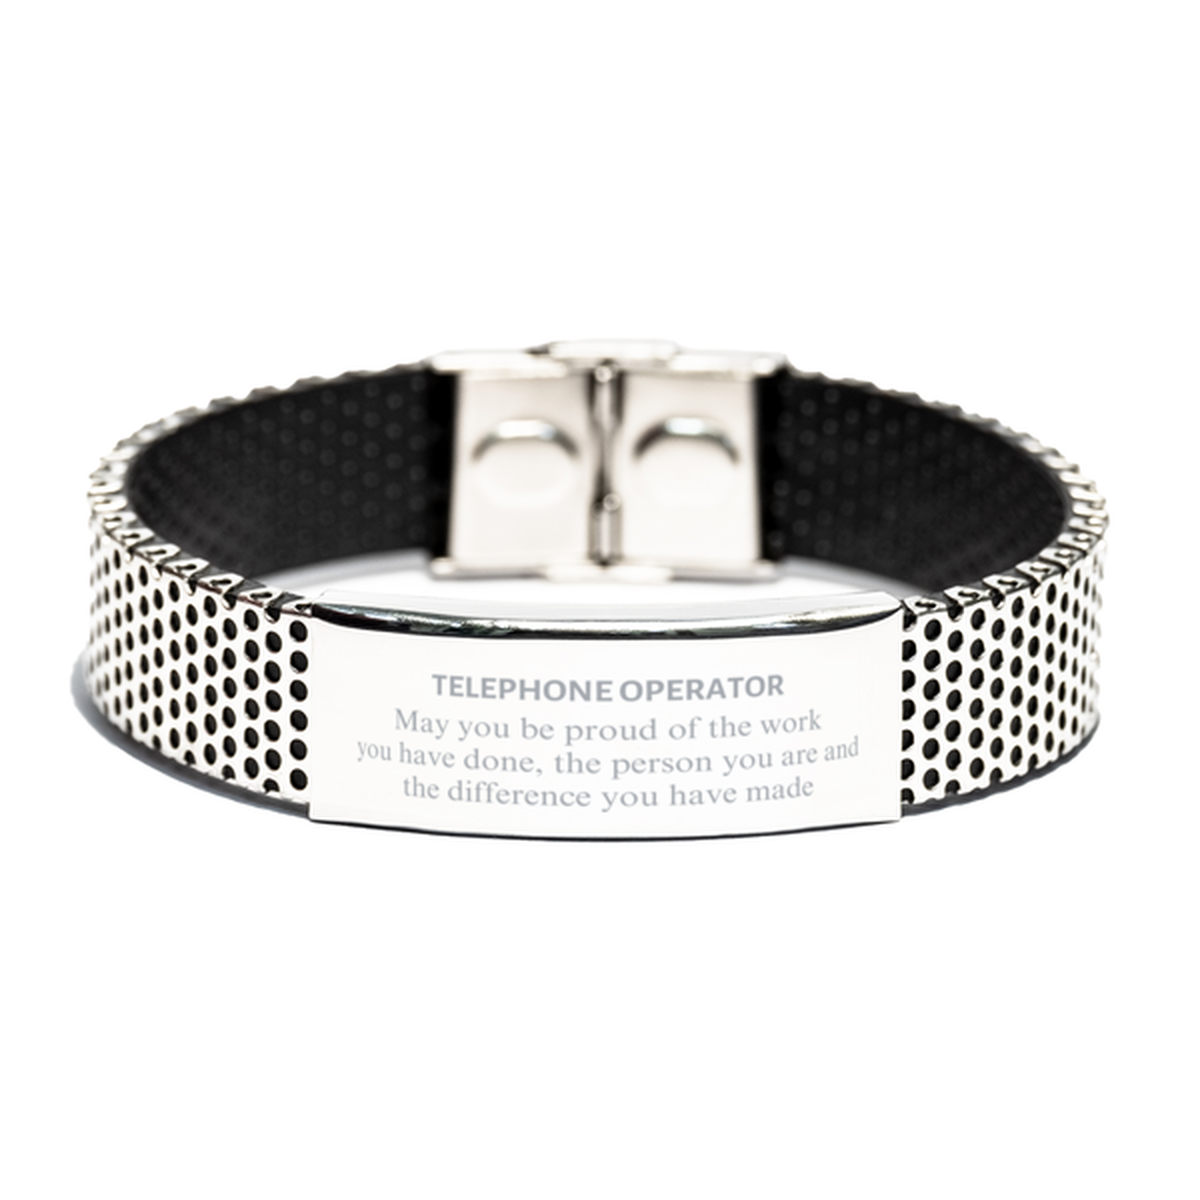 Telephone Operator May you be proud of the work you have done, Retirement Telephone Operator Stainless Steel Bracelet for Colleague Appreciation Gifts Amazing for Telephone Operator